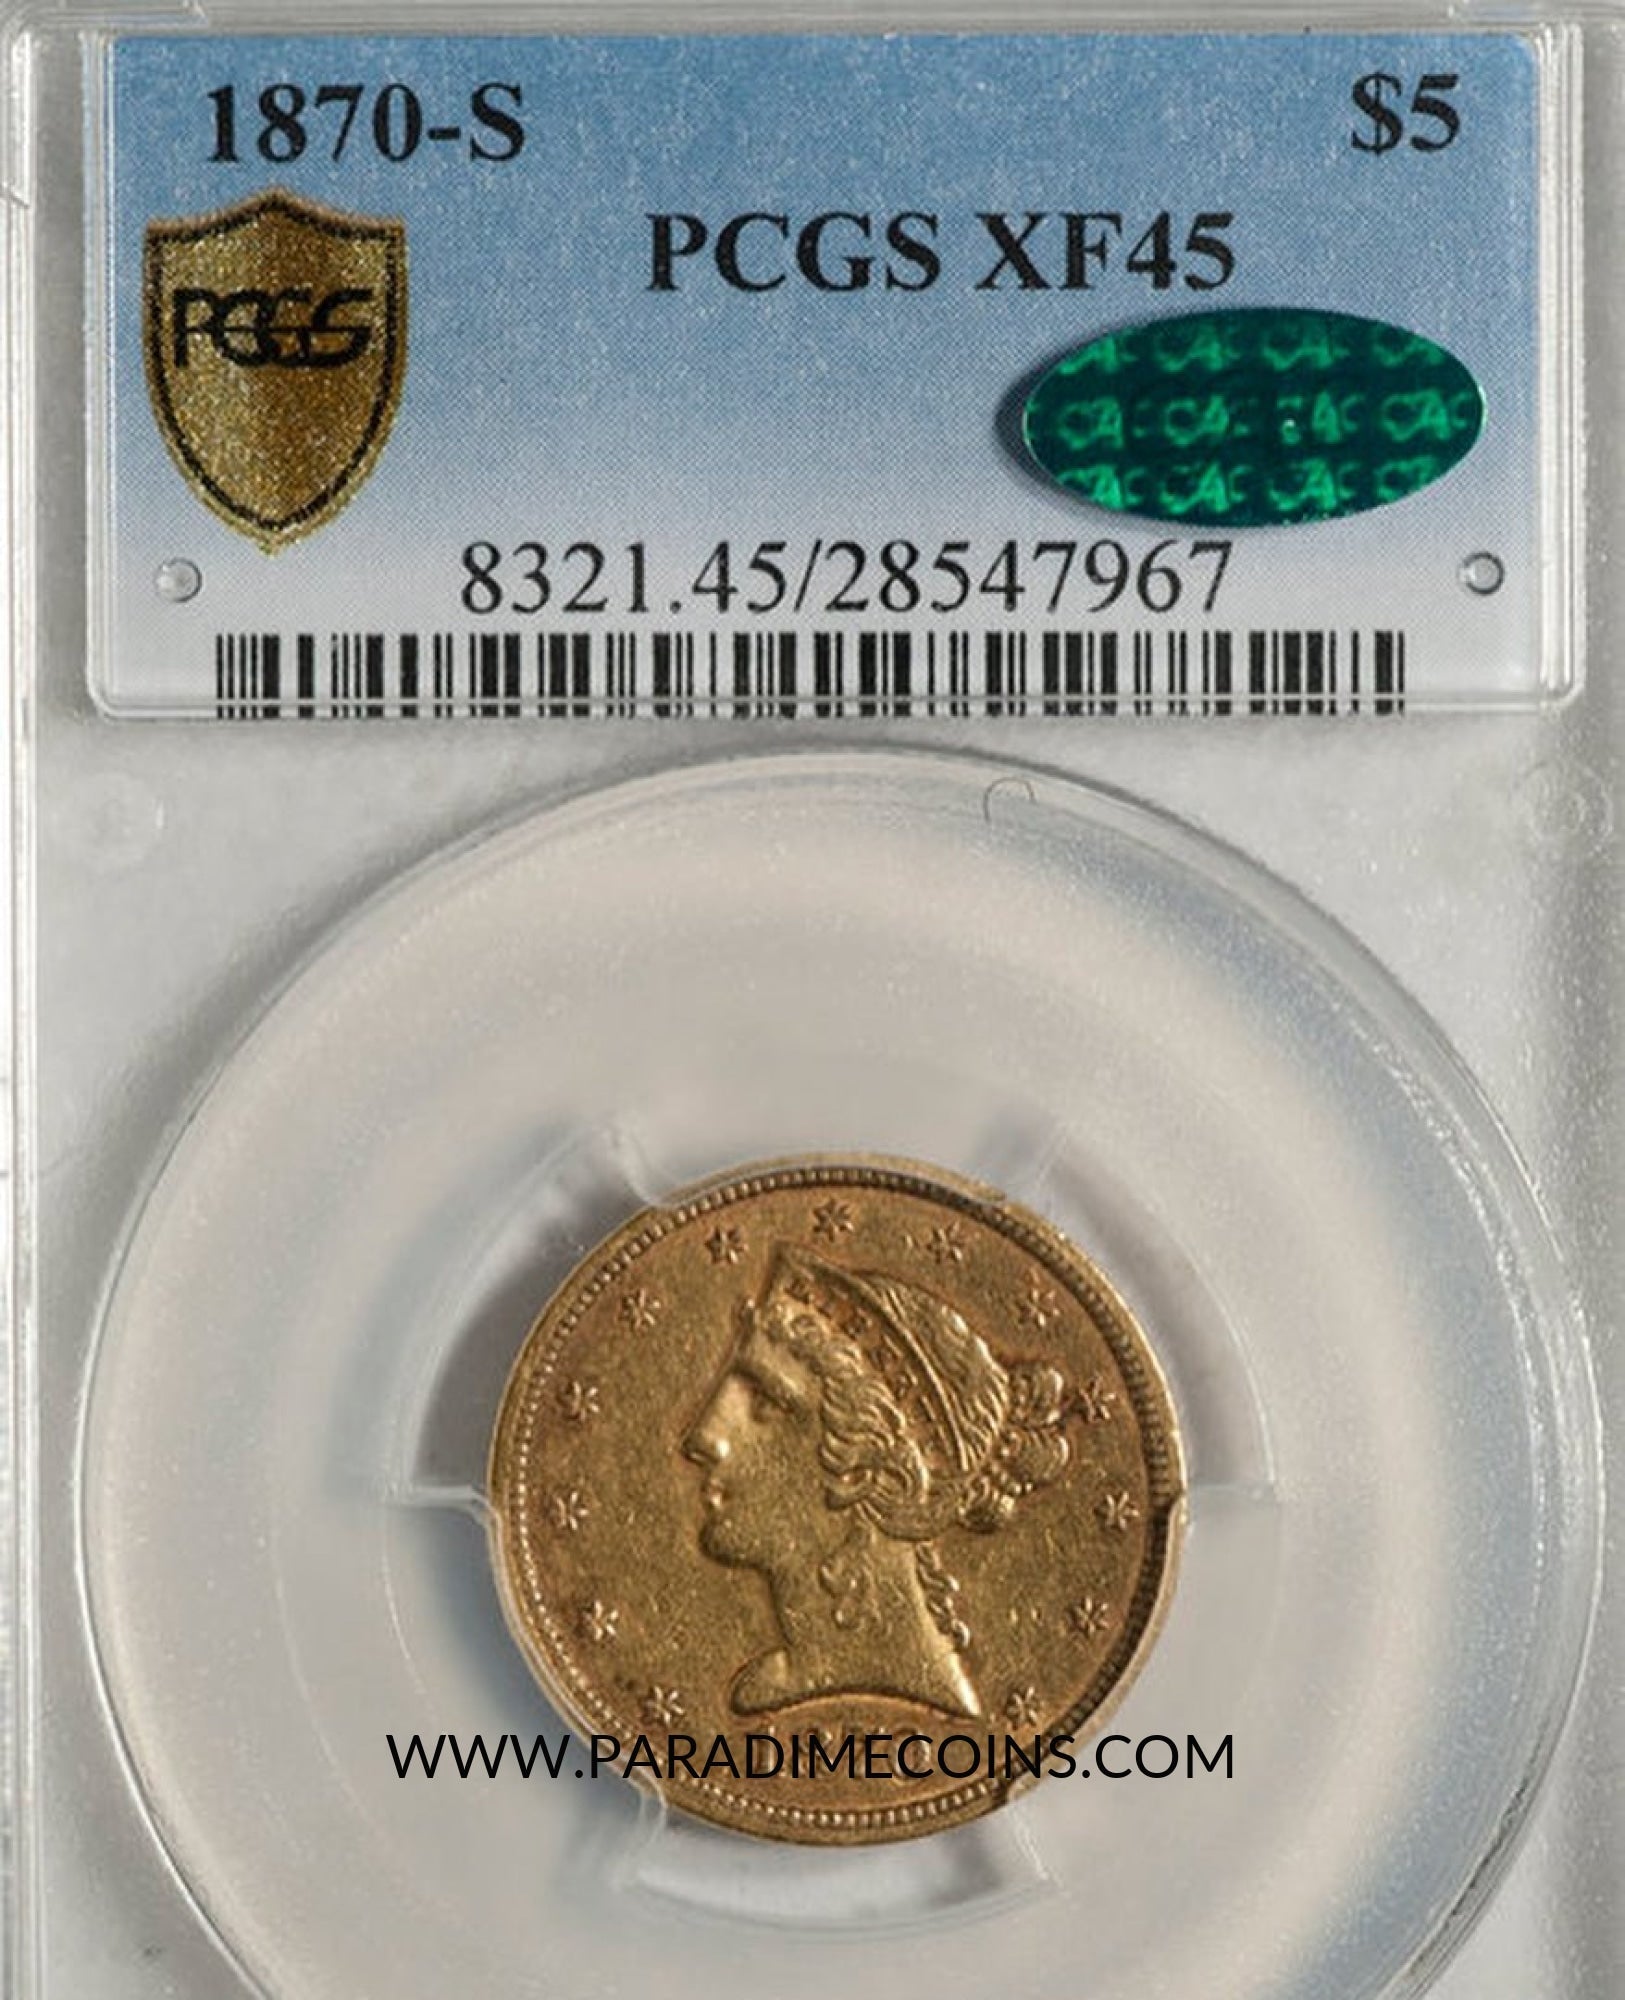 1870-S $5 XF45 PCGS CAC - Paradime Coins | PCGS NGC CACG CAC Rare US Numismatic Coins For Sale